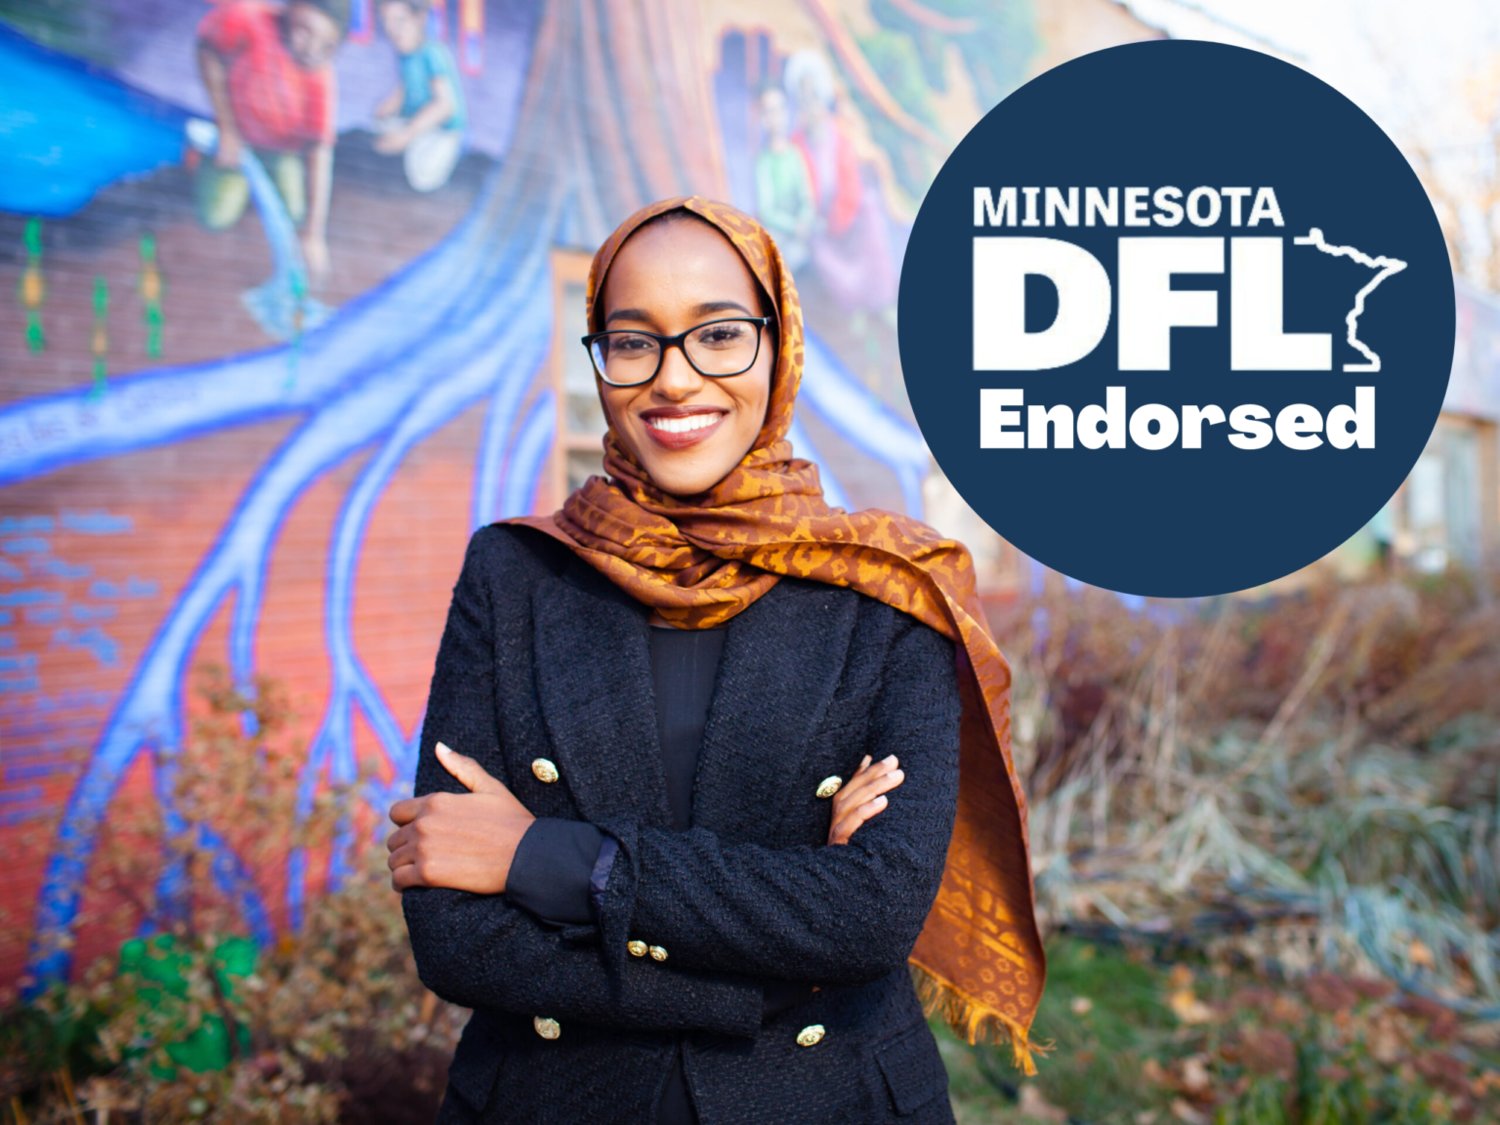 Zaynab Mohamed has received the DFL nomination for Minnesota Representative 63A.